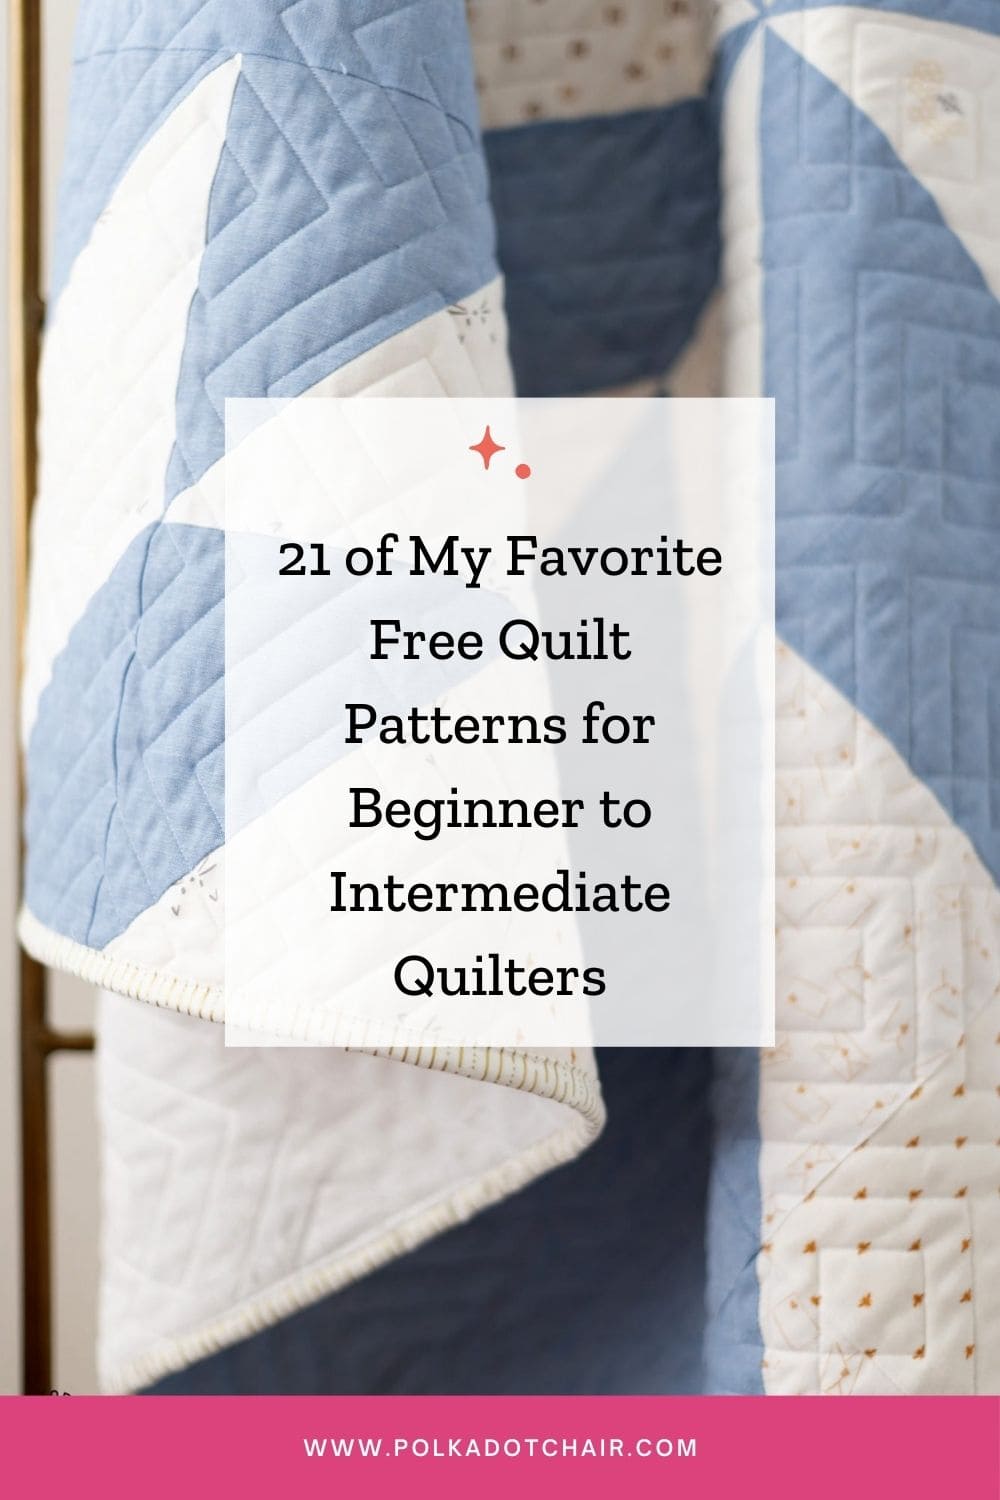 21 of My Favorite Free Quilt Patterns for Beginner to Intermediate Quilters